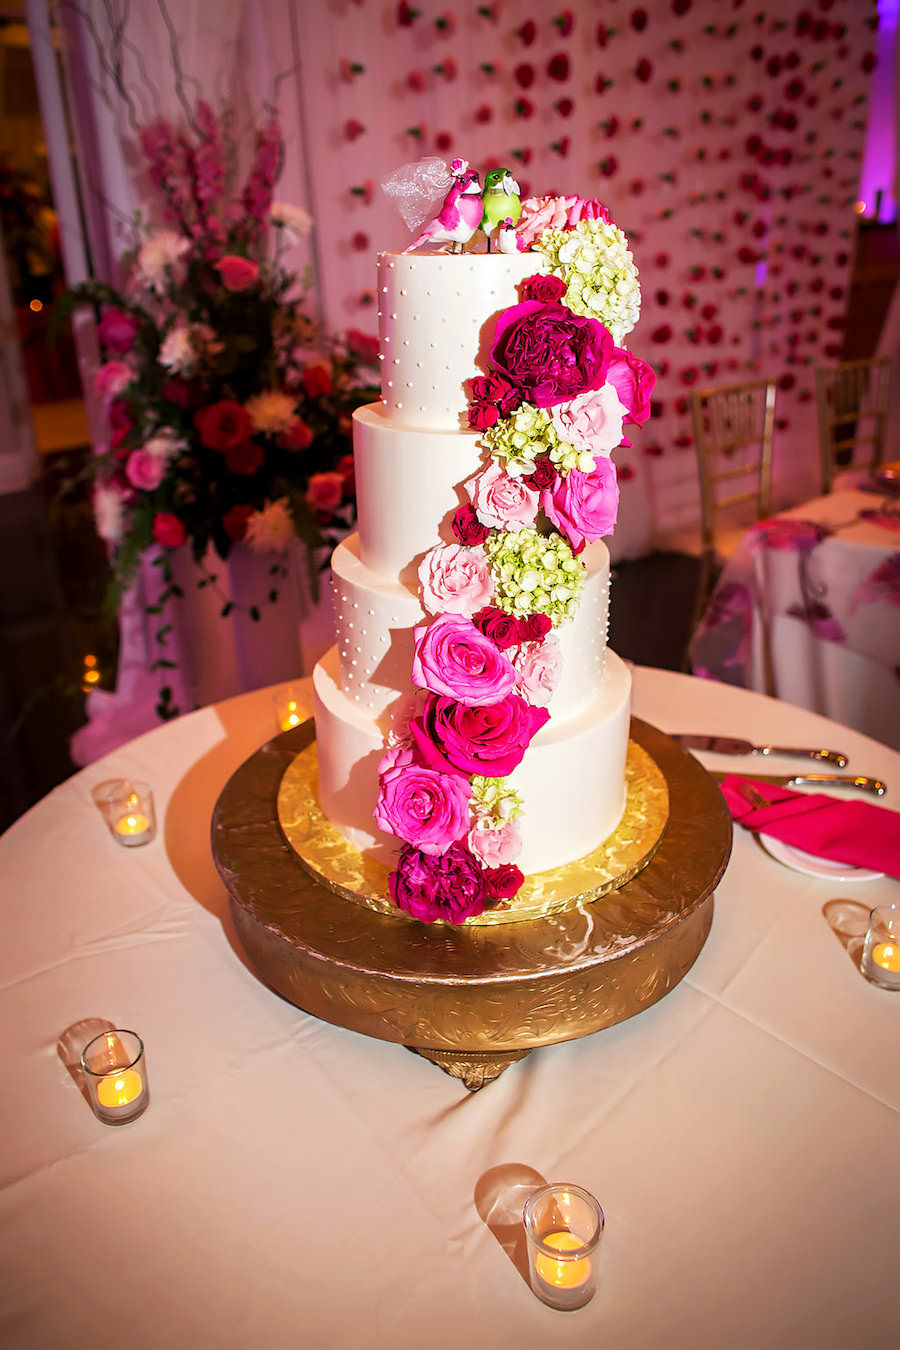 Four Tier Lilly Pulitzer Theme White Wedding Cake with Pink and Green Roses and Hydrangea on Gold Cake Stand | Sarasota Wedding Photography by Limelight Photography